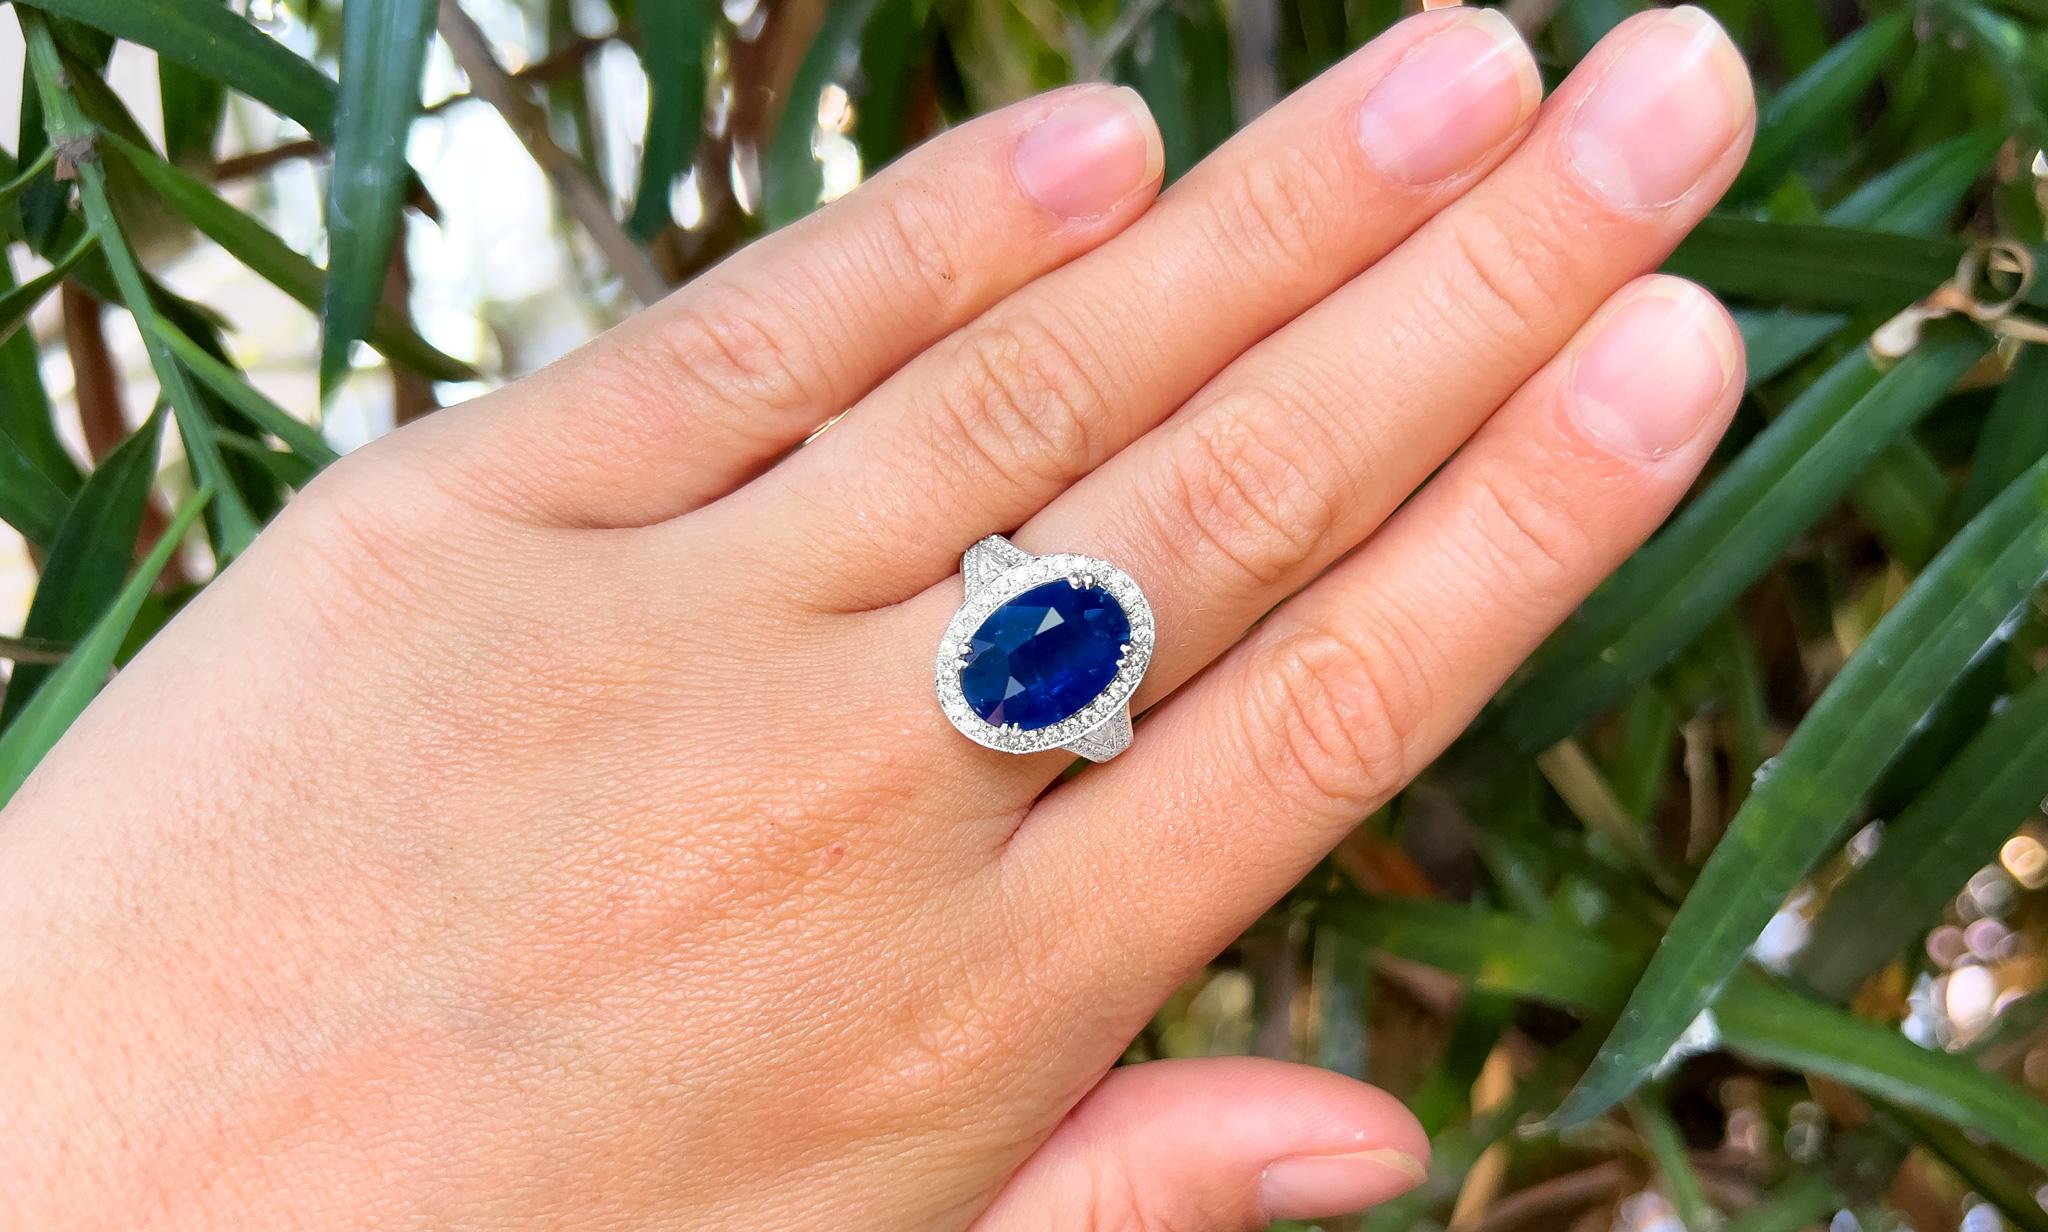 Sapphire = 6.51 Carat
Cut: Oval
Diamonds = 0.70 Carats
( Color: F, Clarity: VS )
Metal: 18K Gold
Ring Size: 6.5* US
*It can be resized complimentary